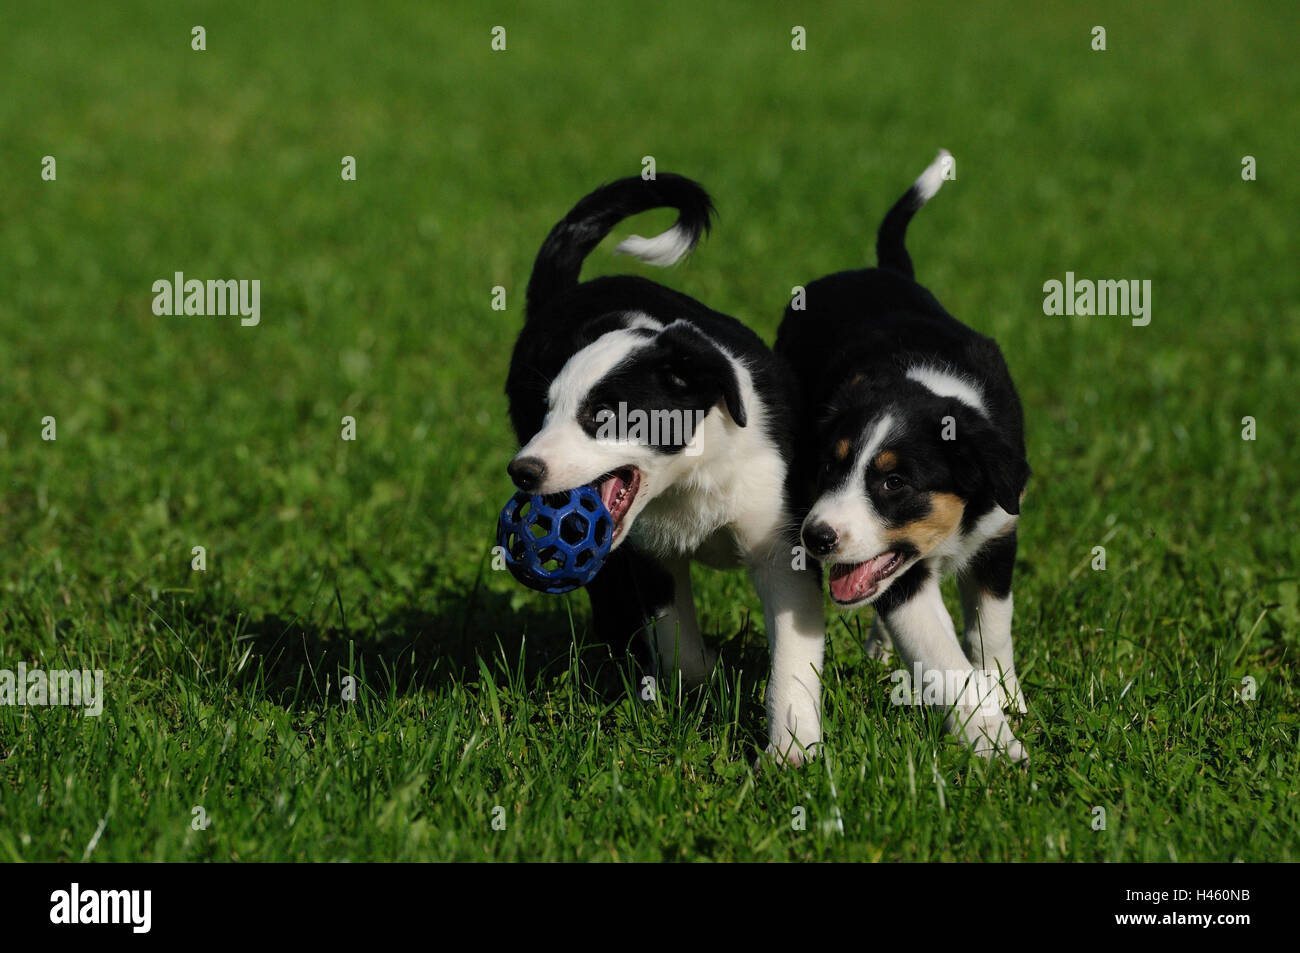 Of Border collie, puppies, meadow, play, Stock Photo